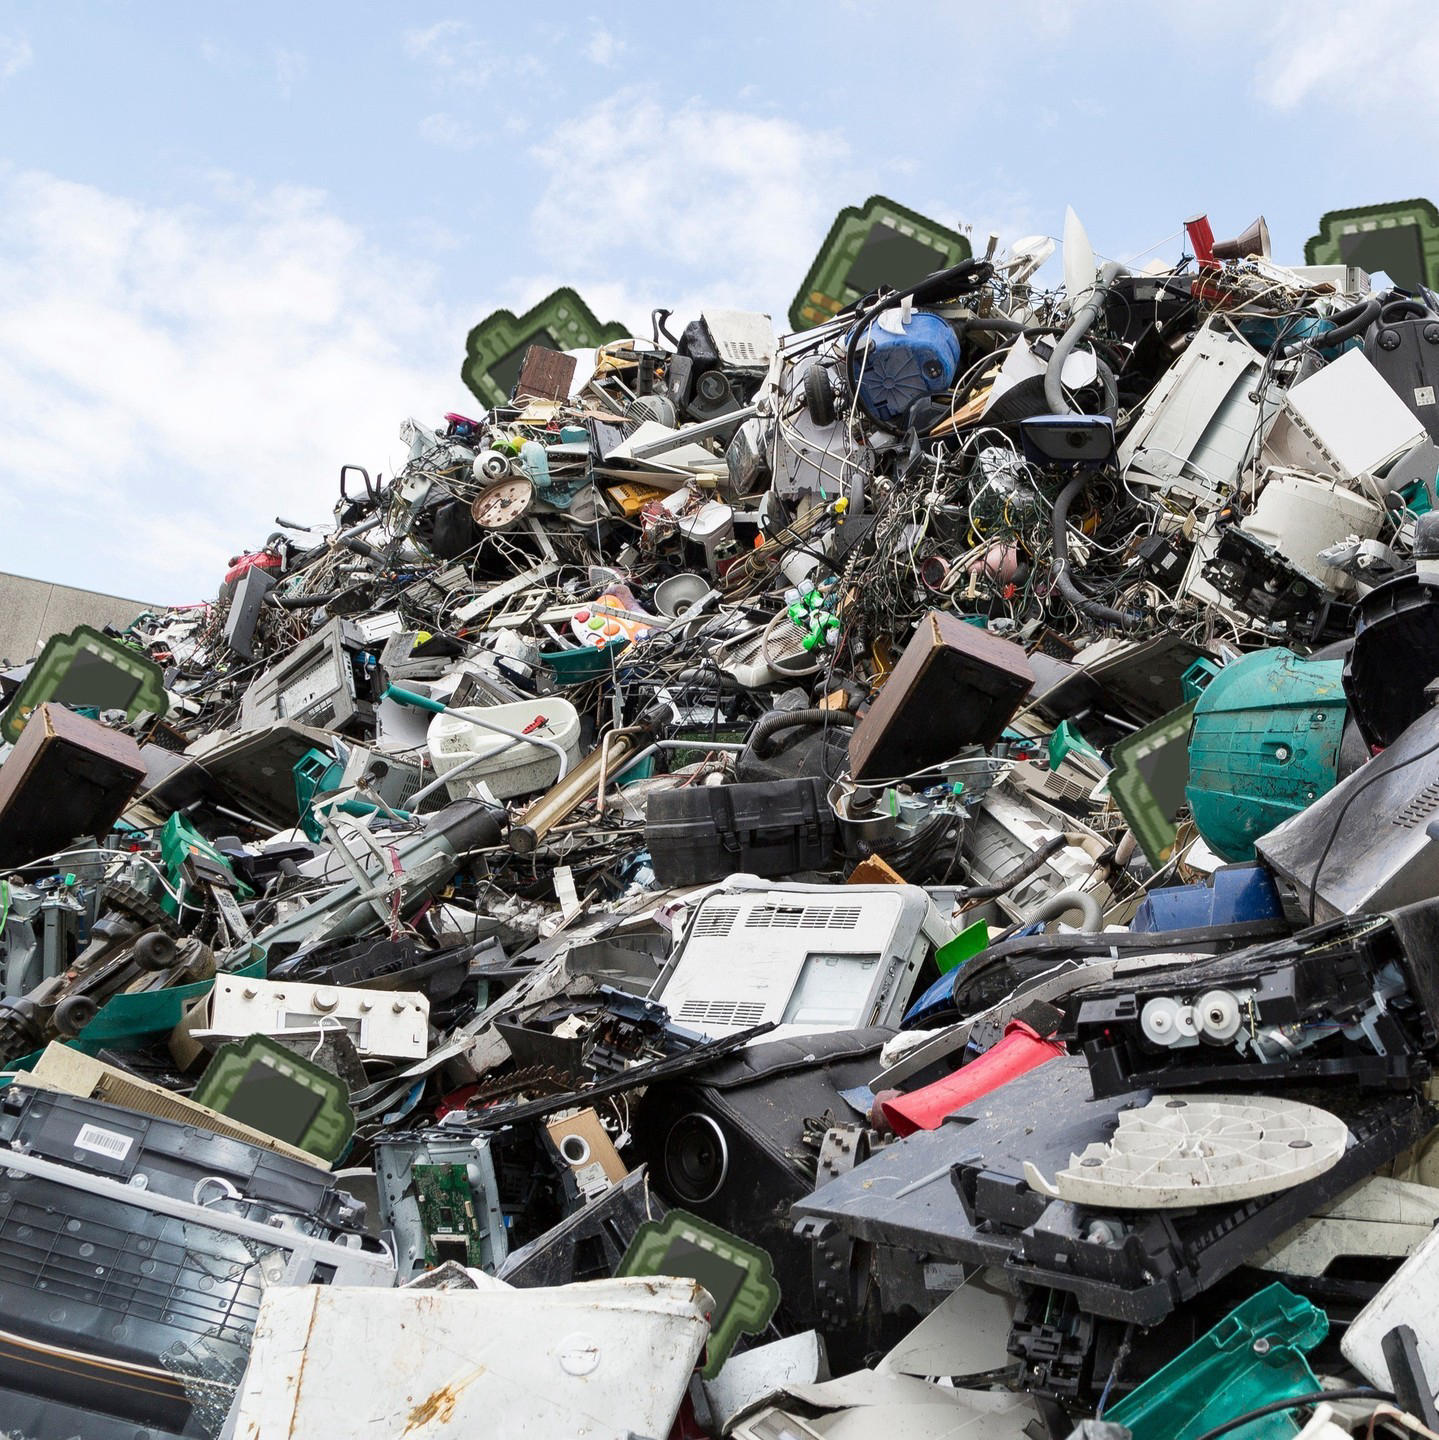 Intel - Did you know that 54 million tons of electronics get trashed every year